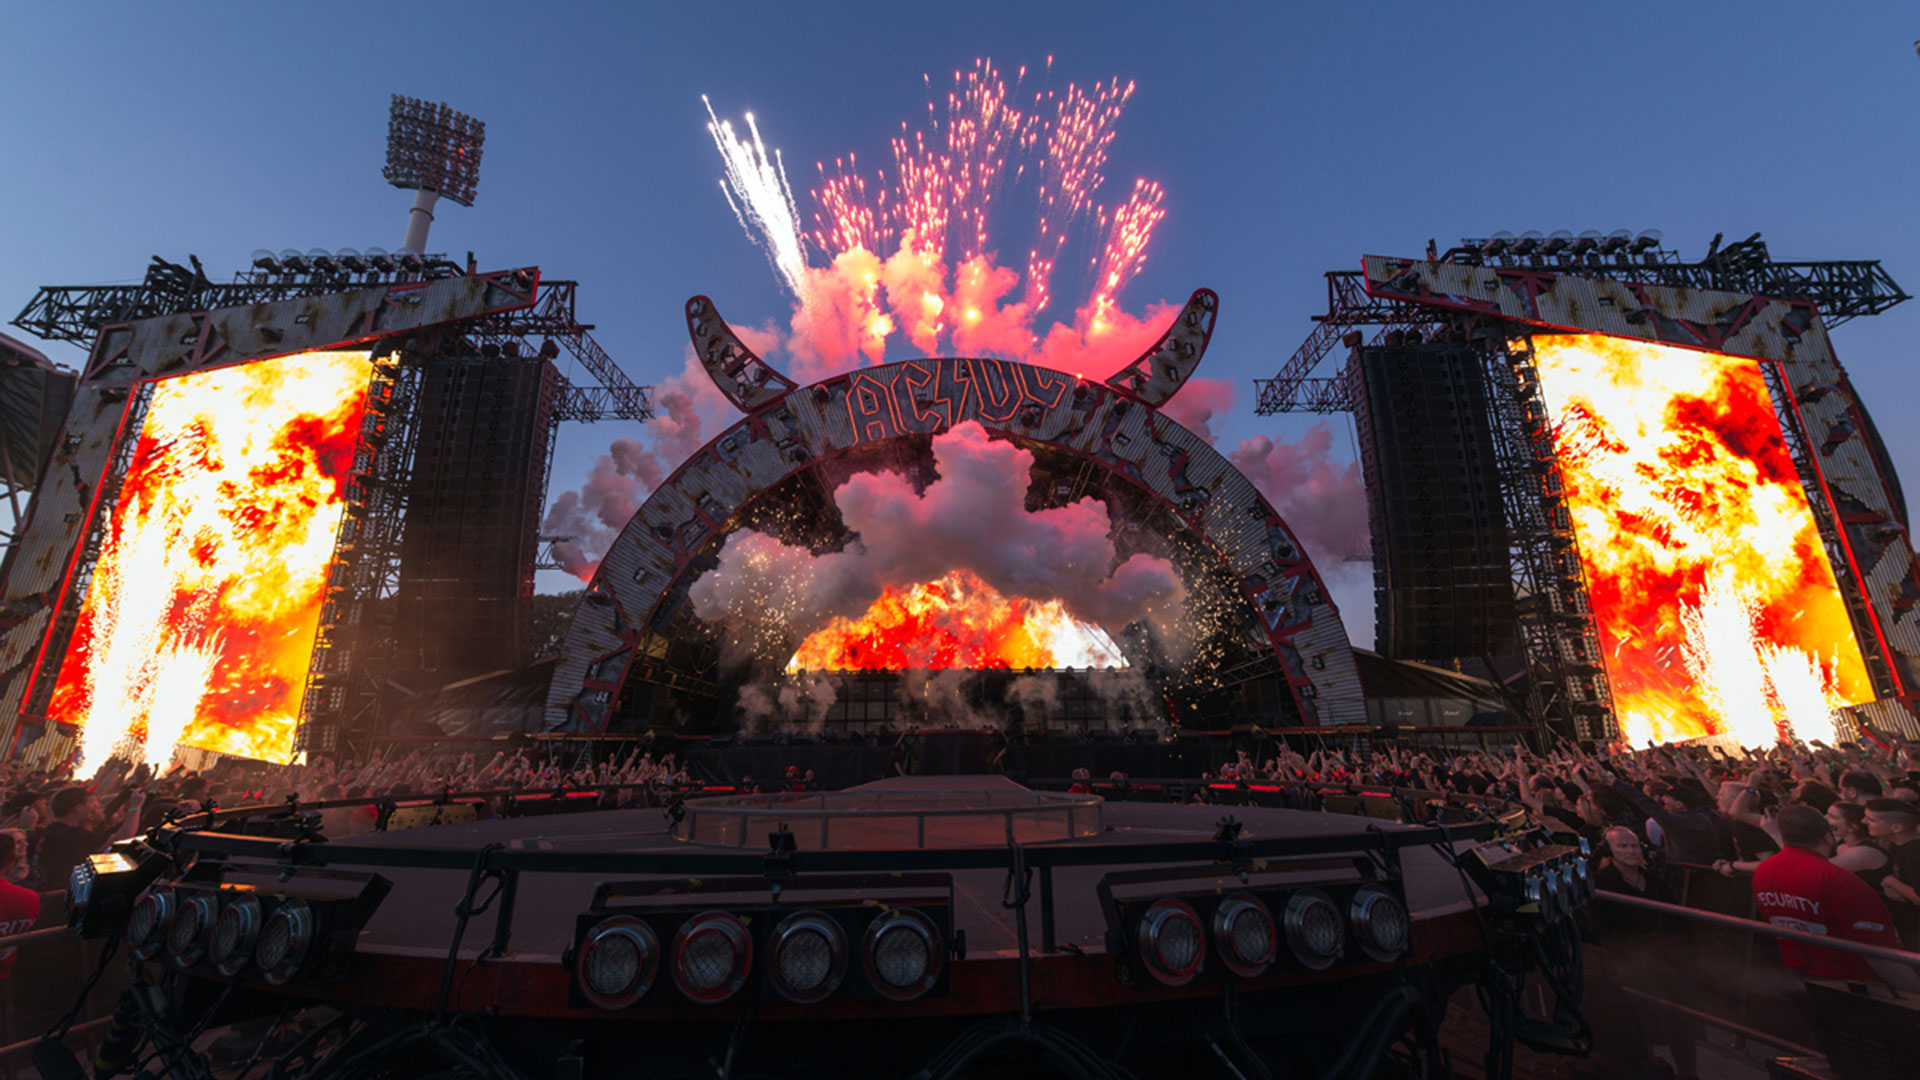 ACDC at Adelaide Oval